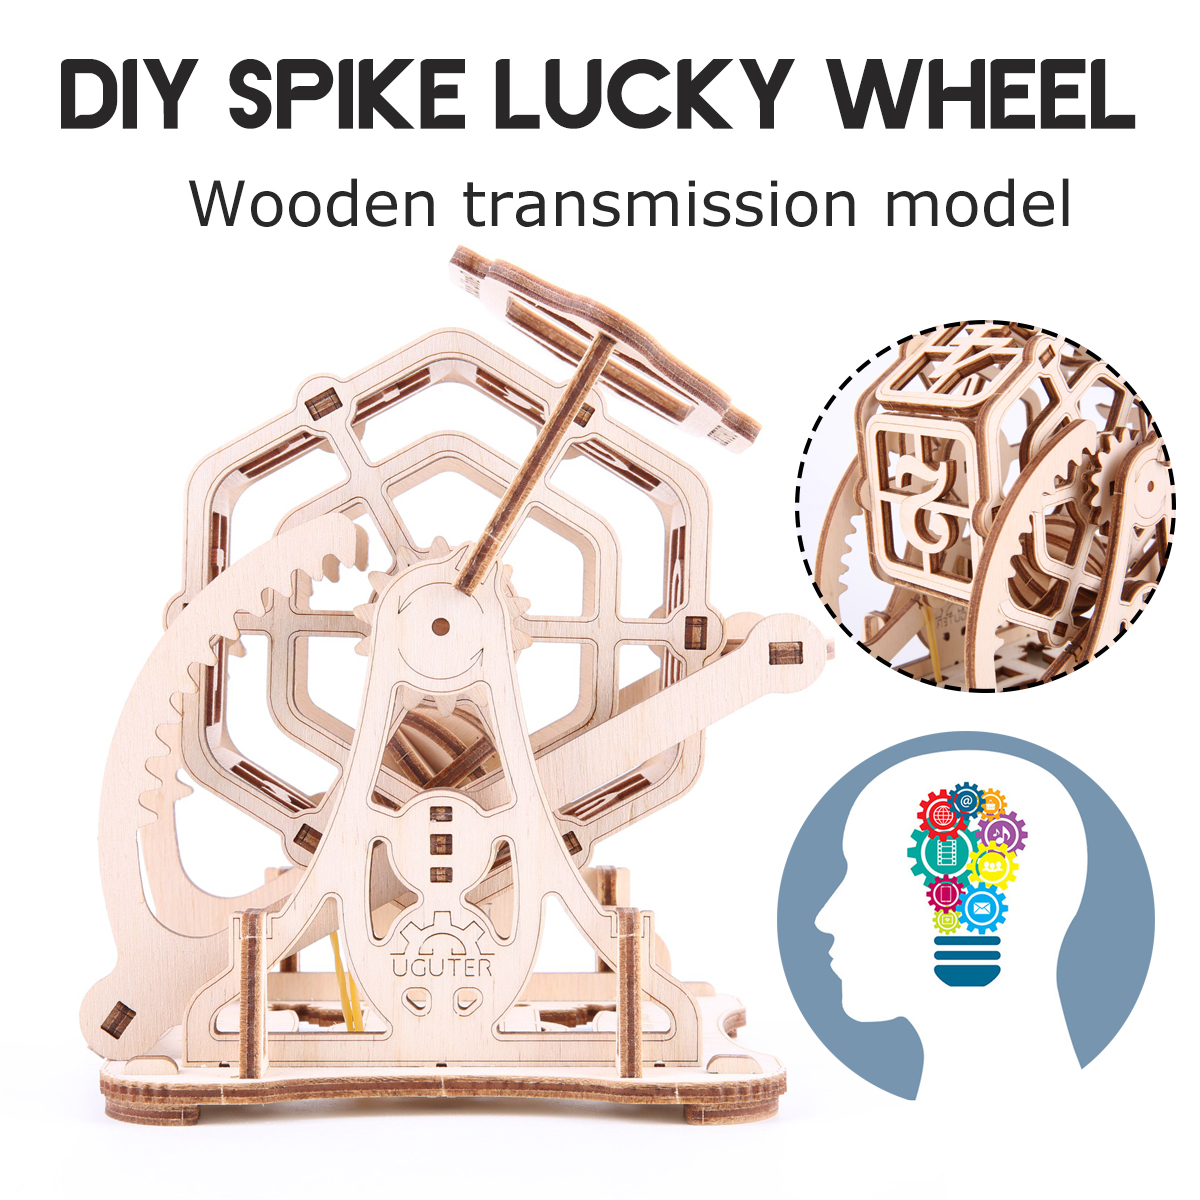 3D-Wooden-Lucky-Runner-Dice-Puzzle-DIY-Mechanical-Transmission-Model-Assembly-Toys-Creative-Gift-1648684-1